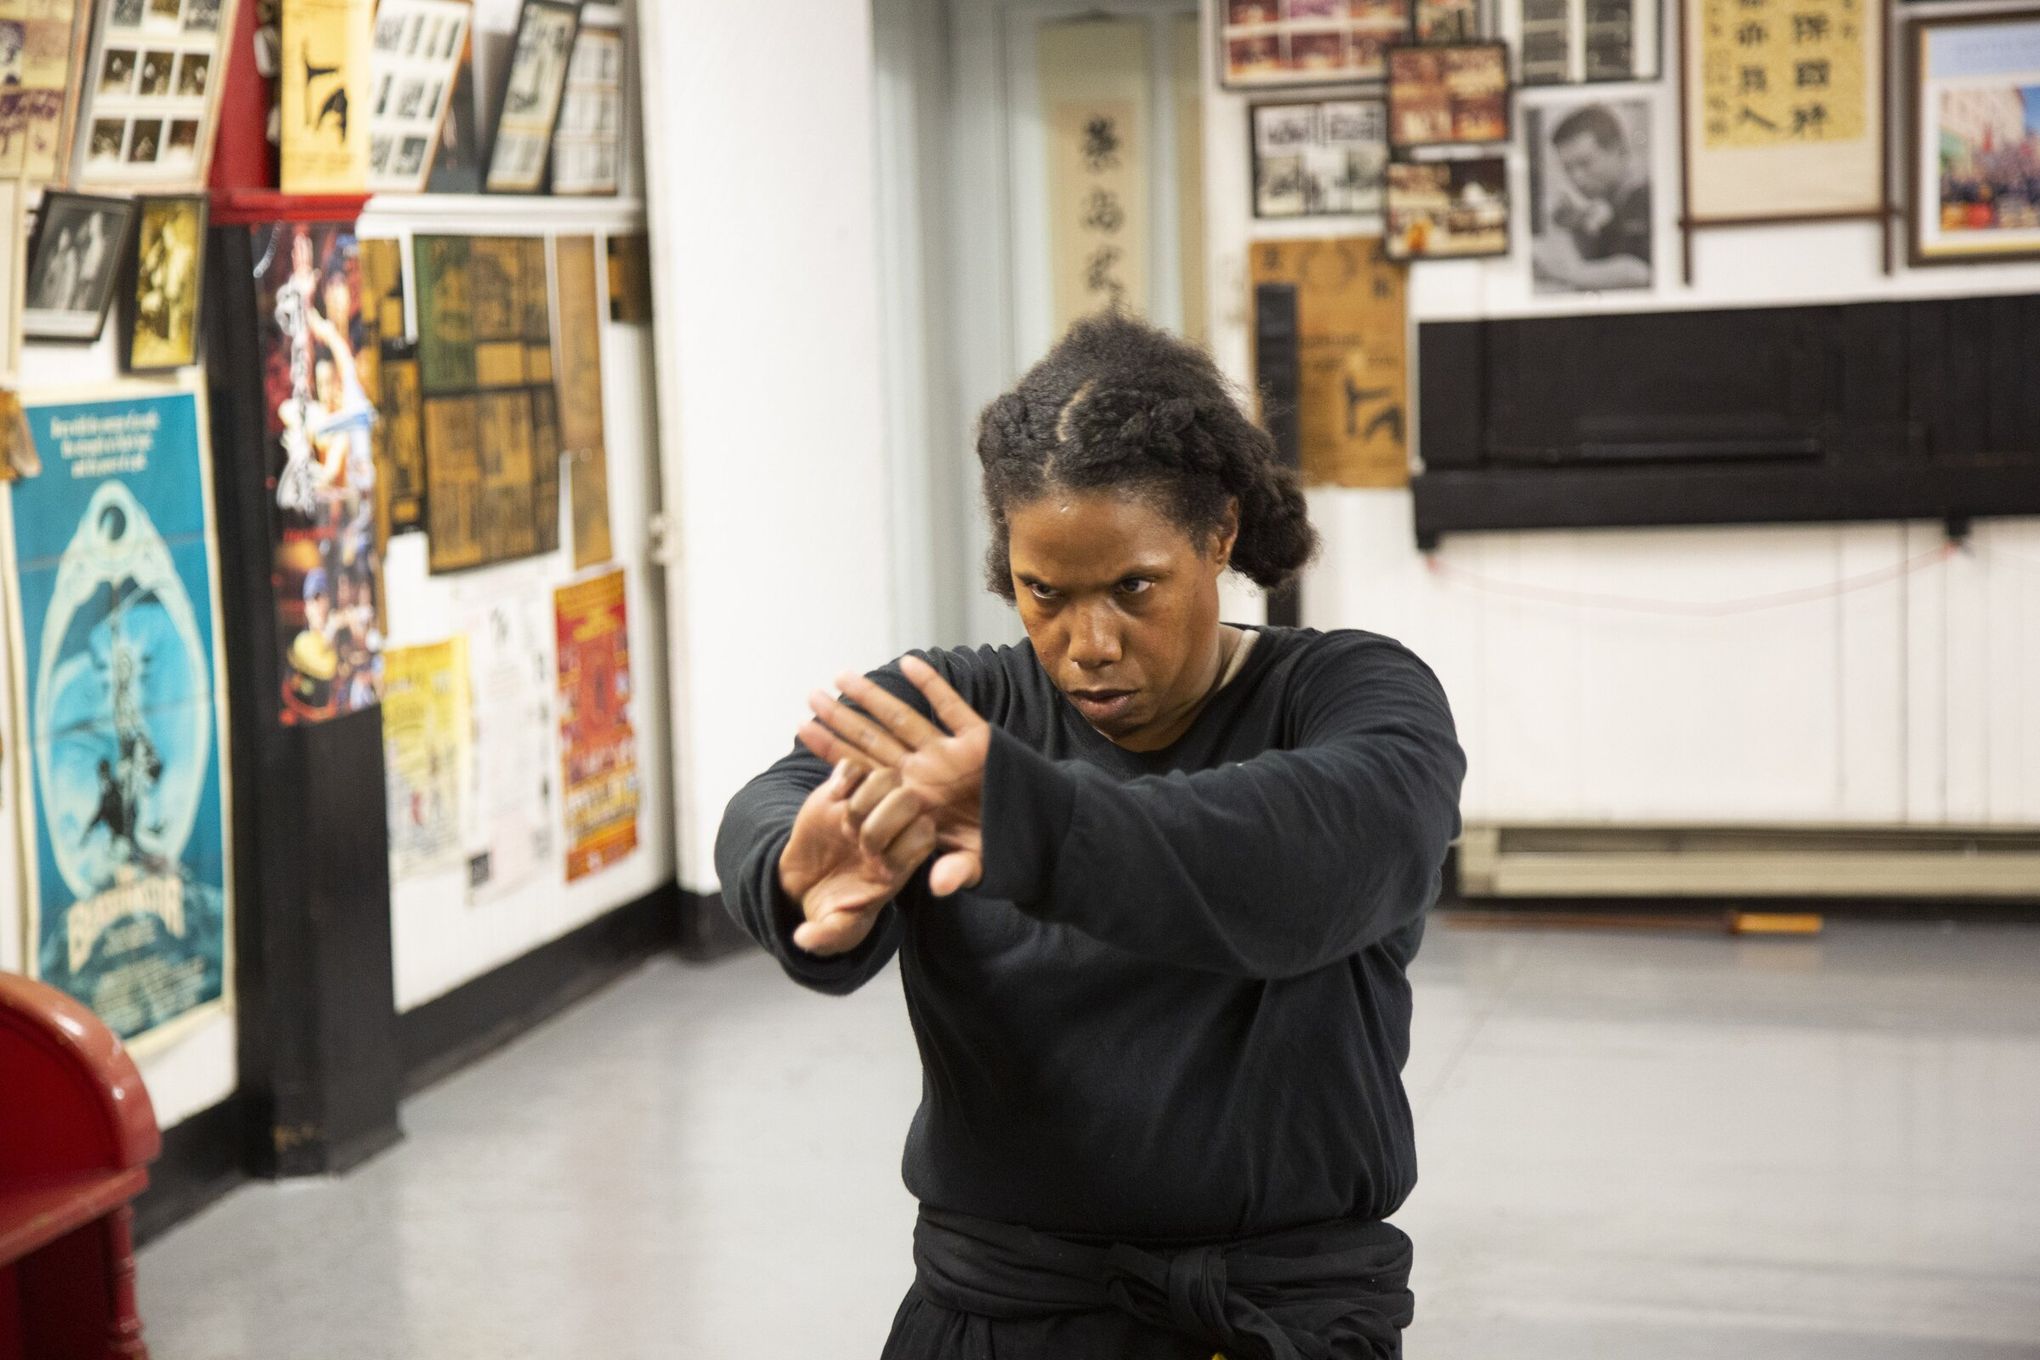 Seattle Kung Fu Club members find exercise and empowerment in classes